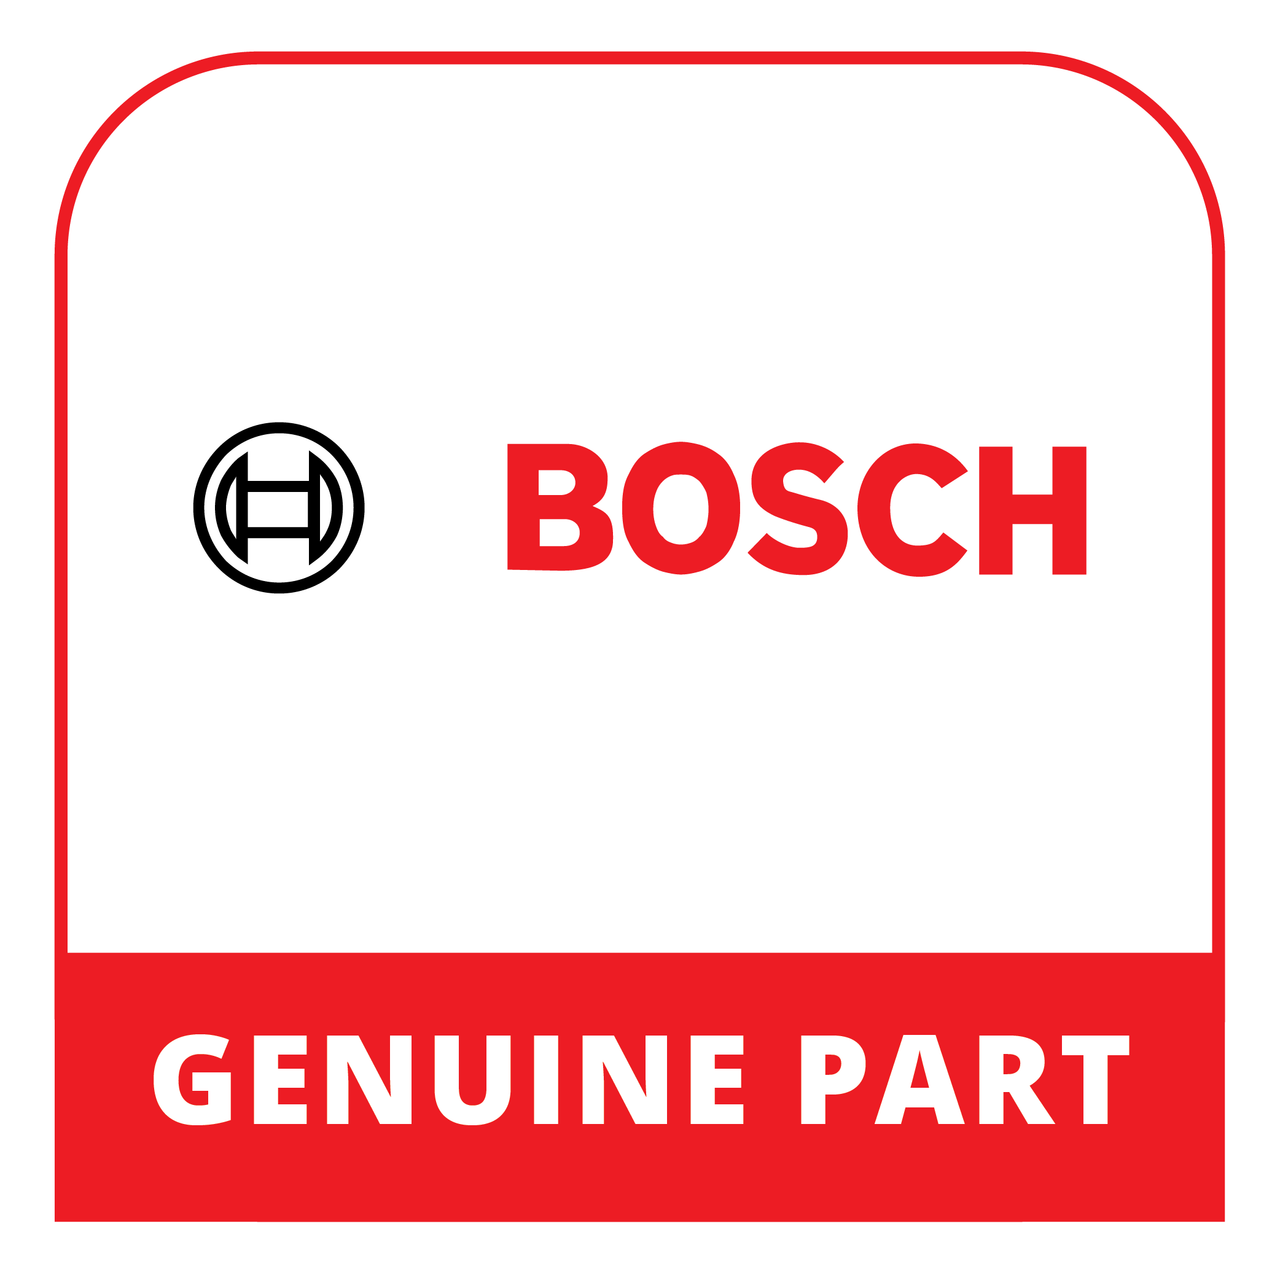 Bosch (Thermador) 10022117 - Washer - Genuine Bosch (Thermador) Part